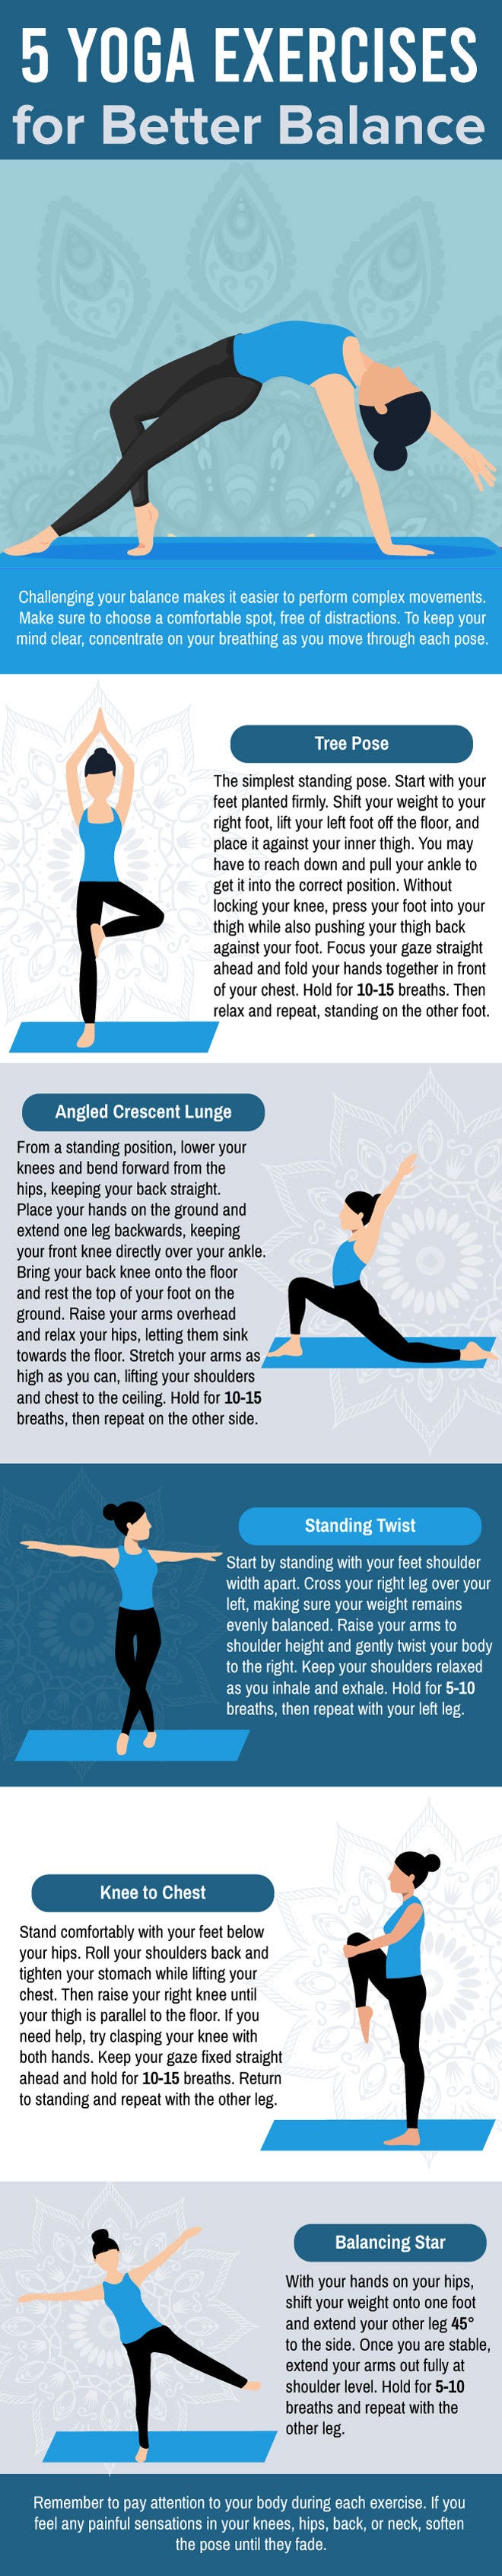 15 Yoga Tips for Anyone with a Bigger Body - YOGA PRACTICE